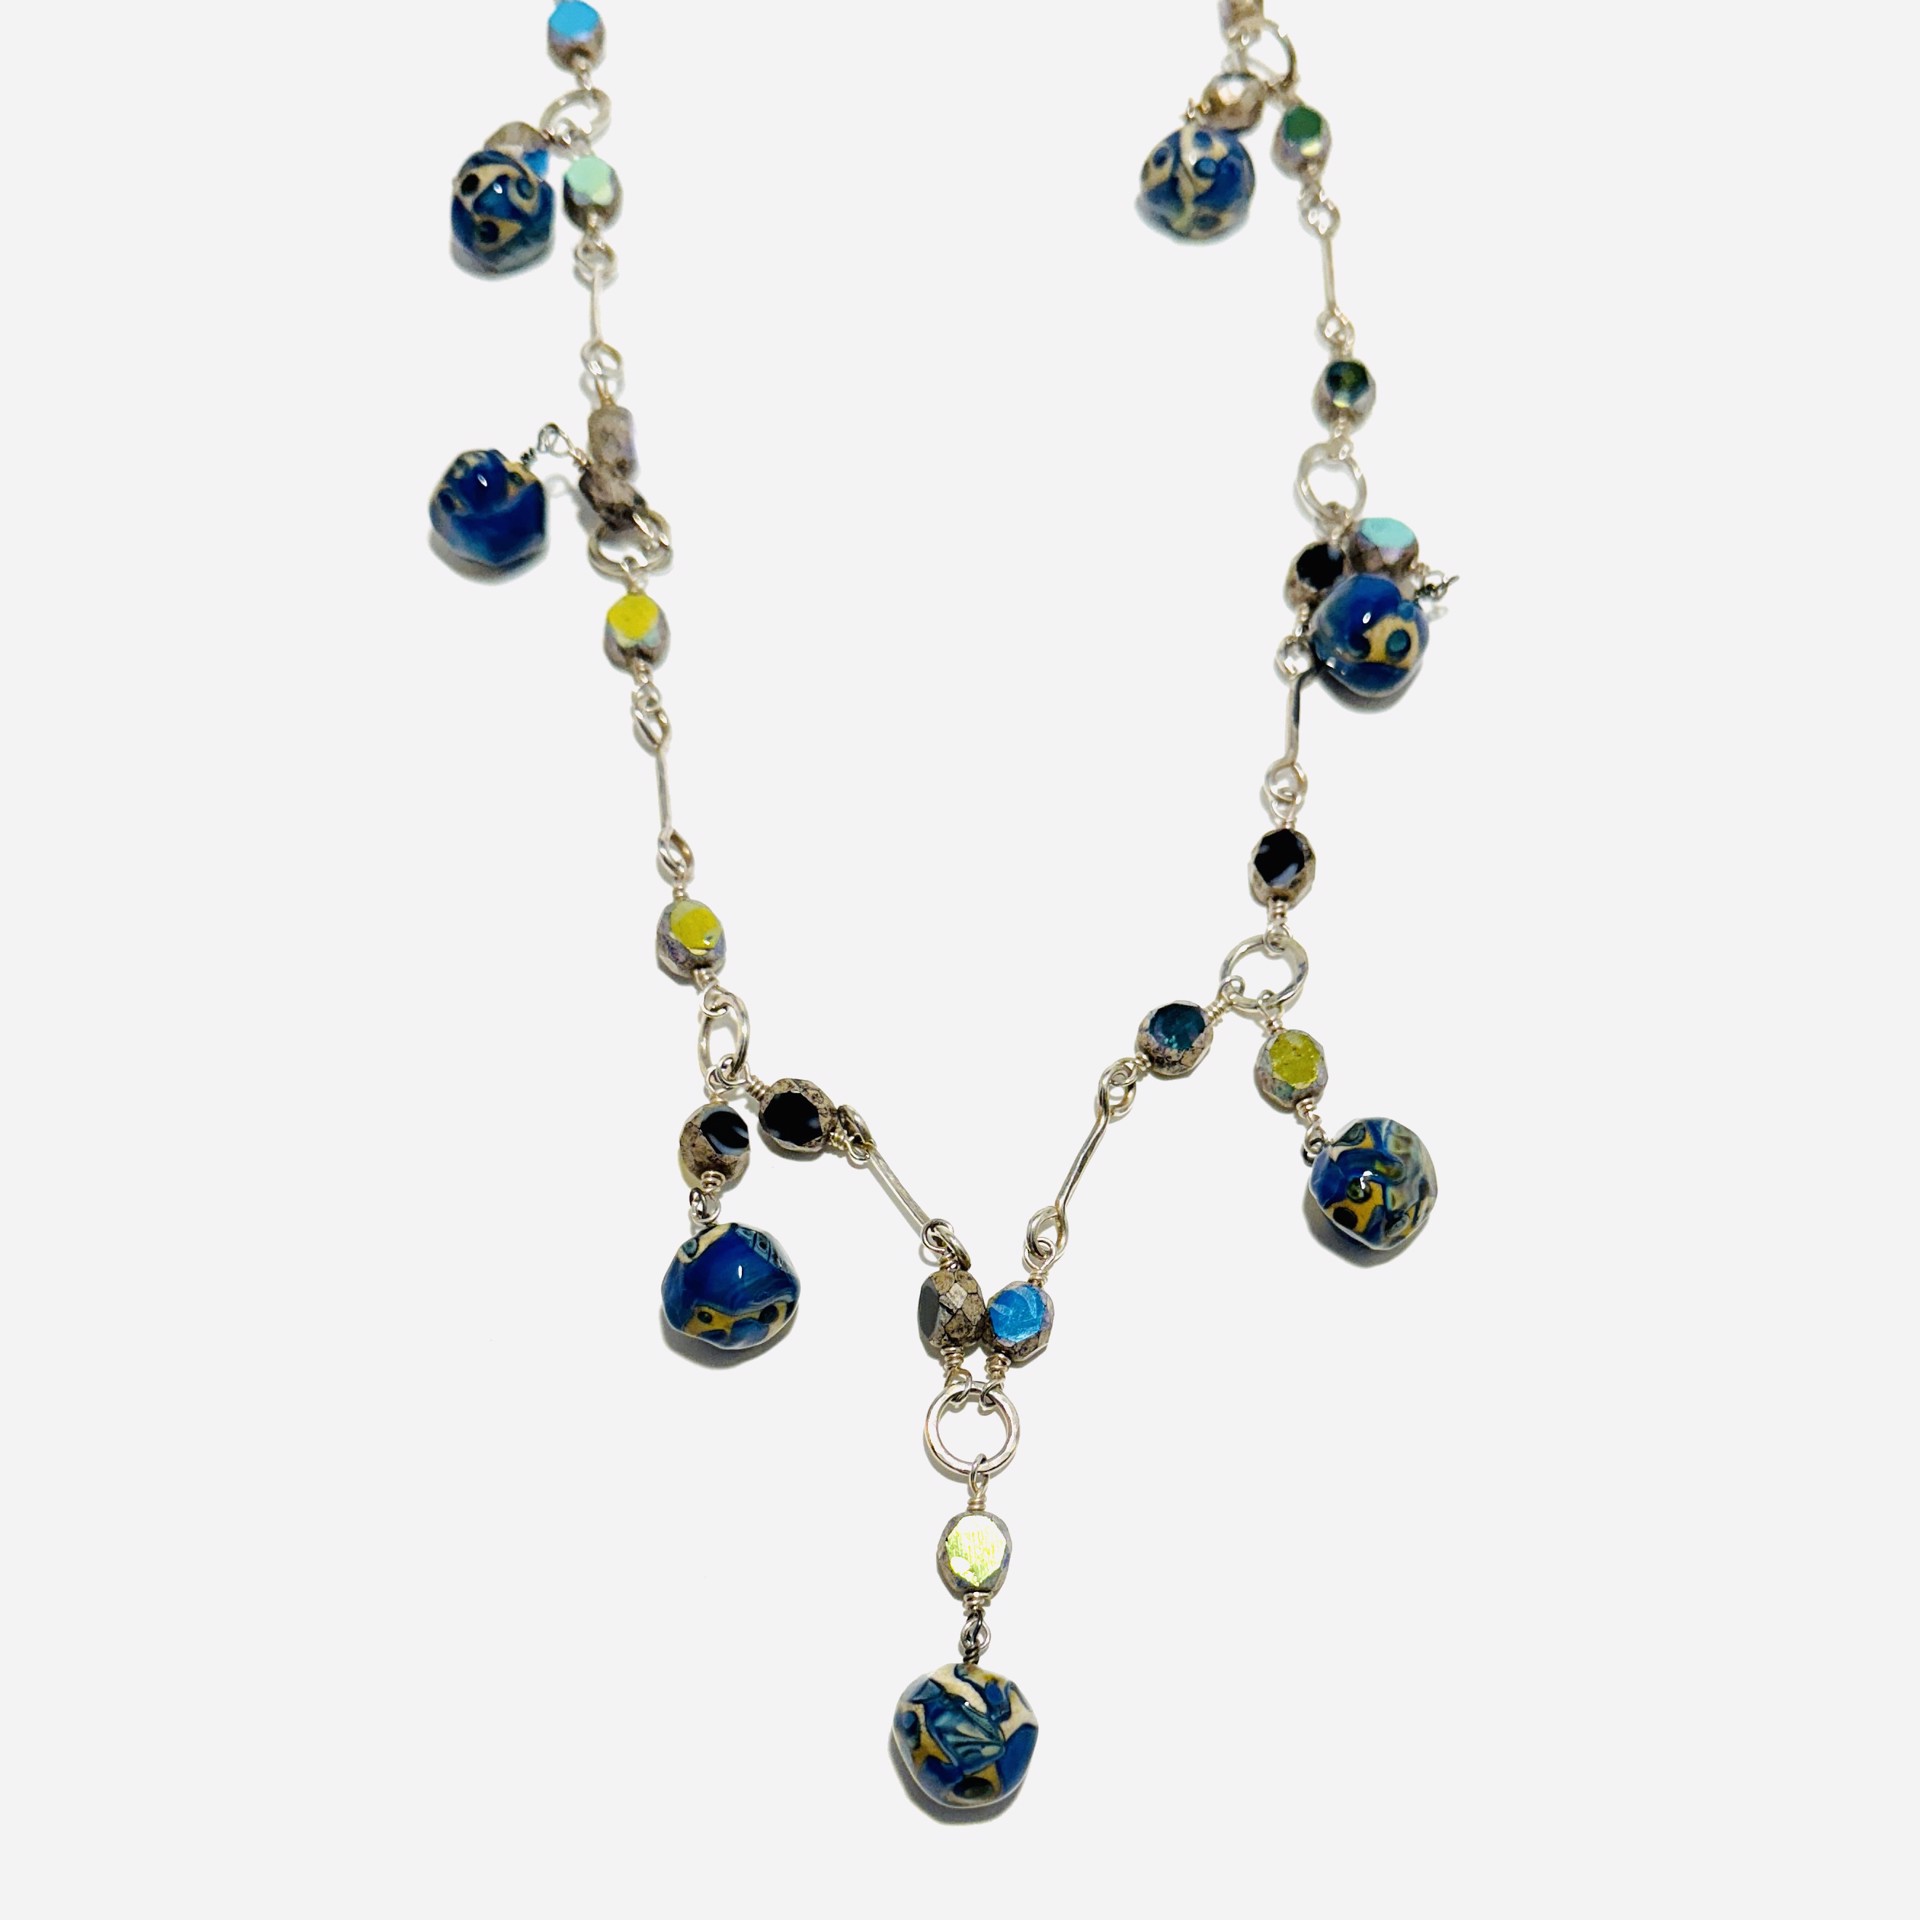 Ivory, Kronos and Murrini Drop Beads, European Glass and Handcrafted Sterling Link Necklace LS23-54 by Linda Sacra